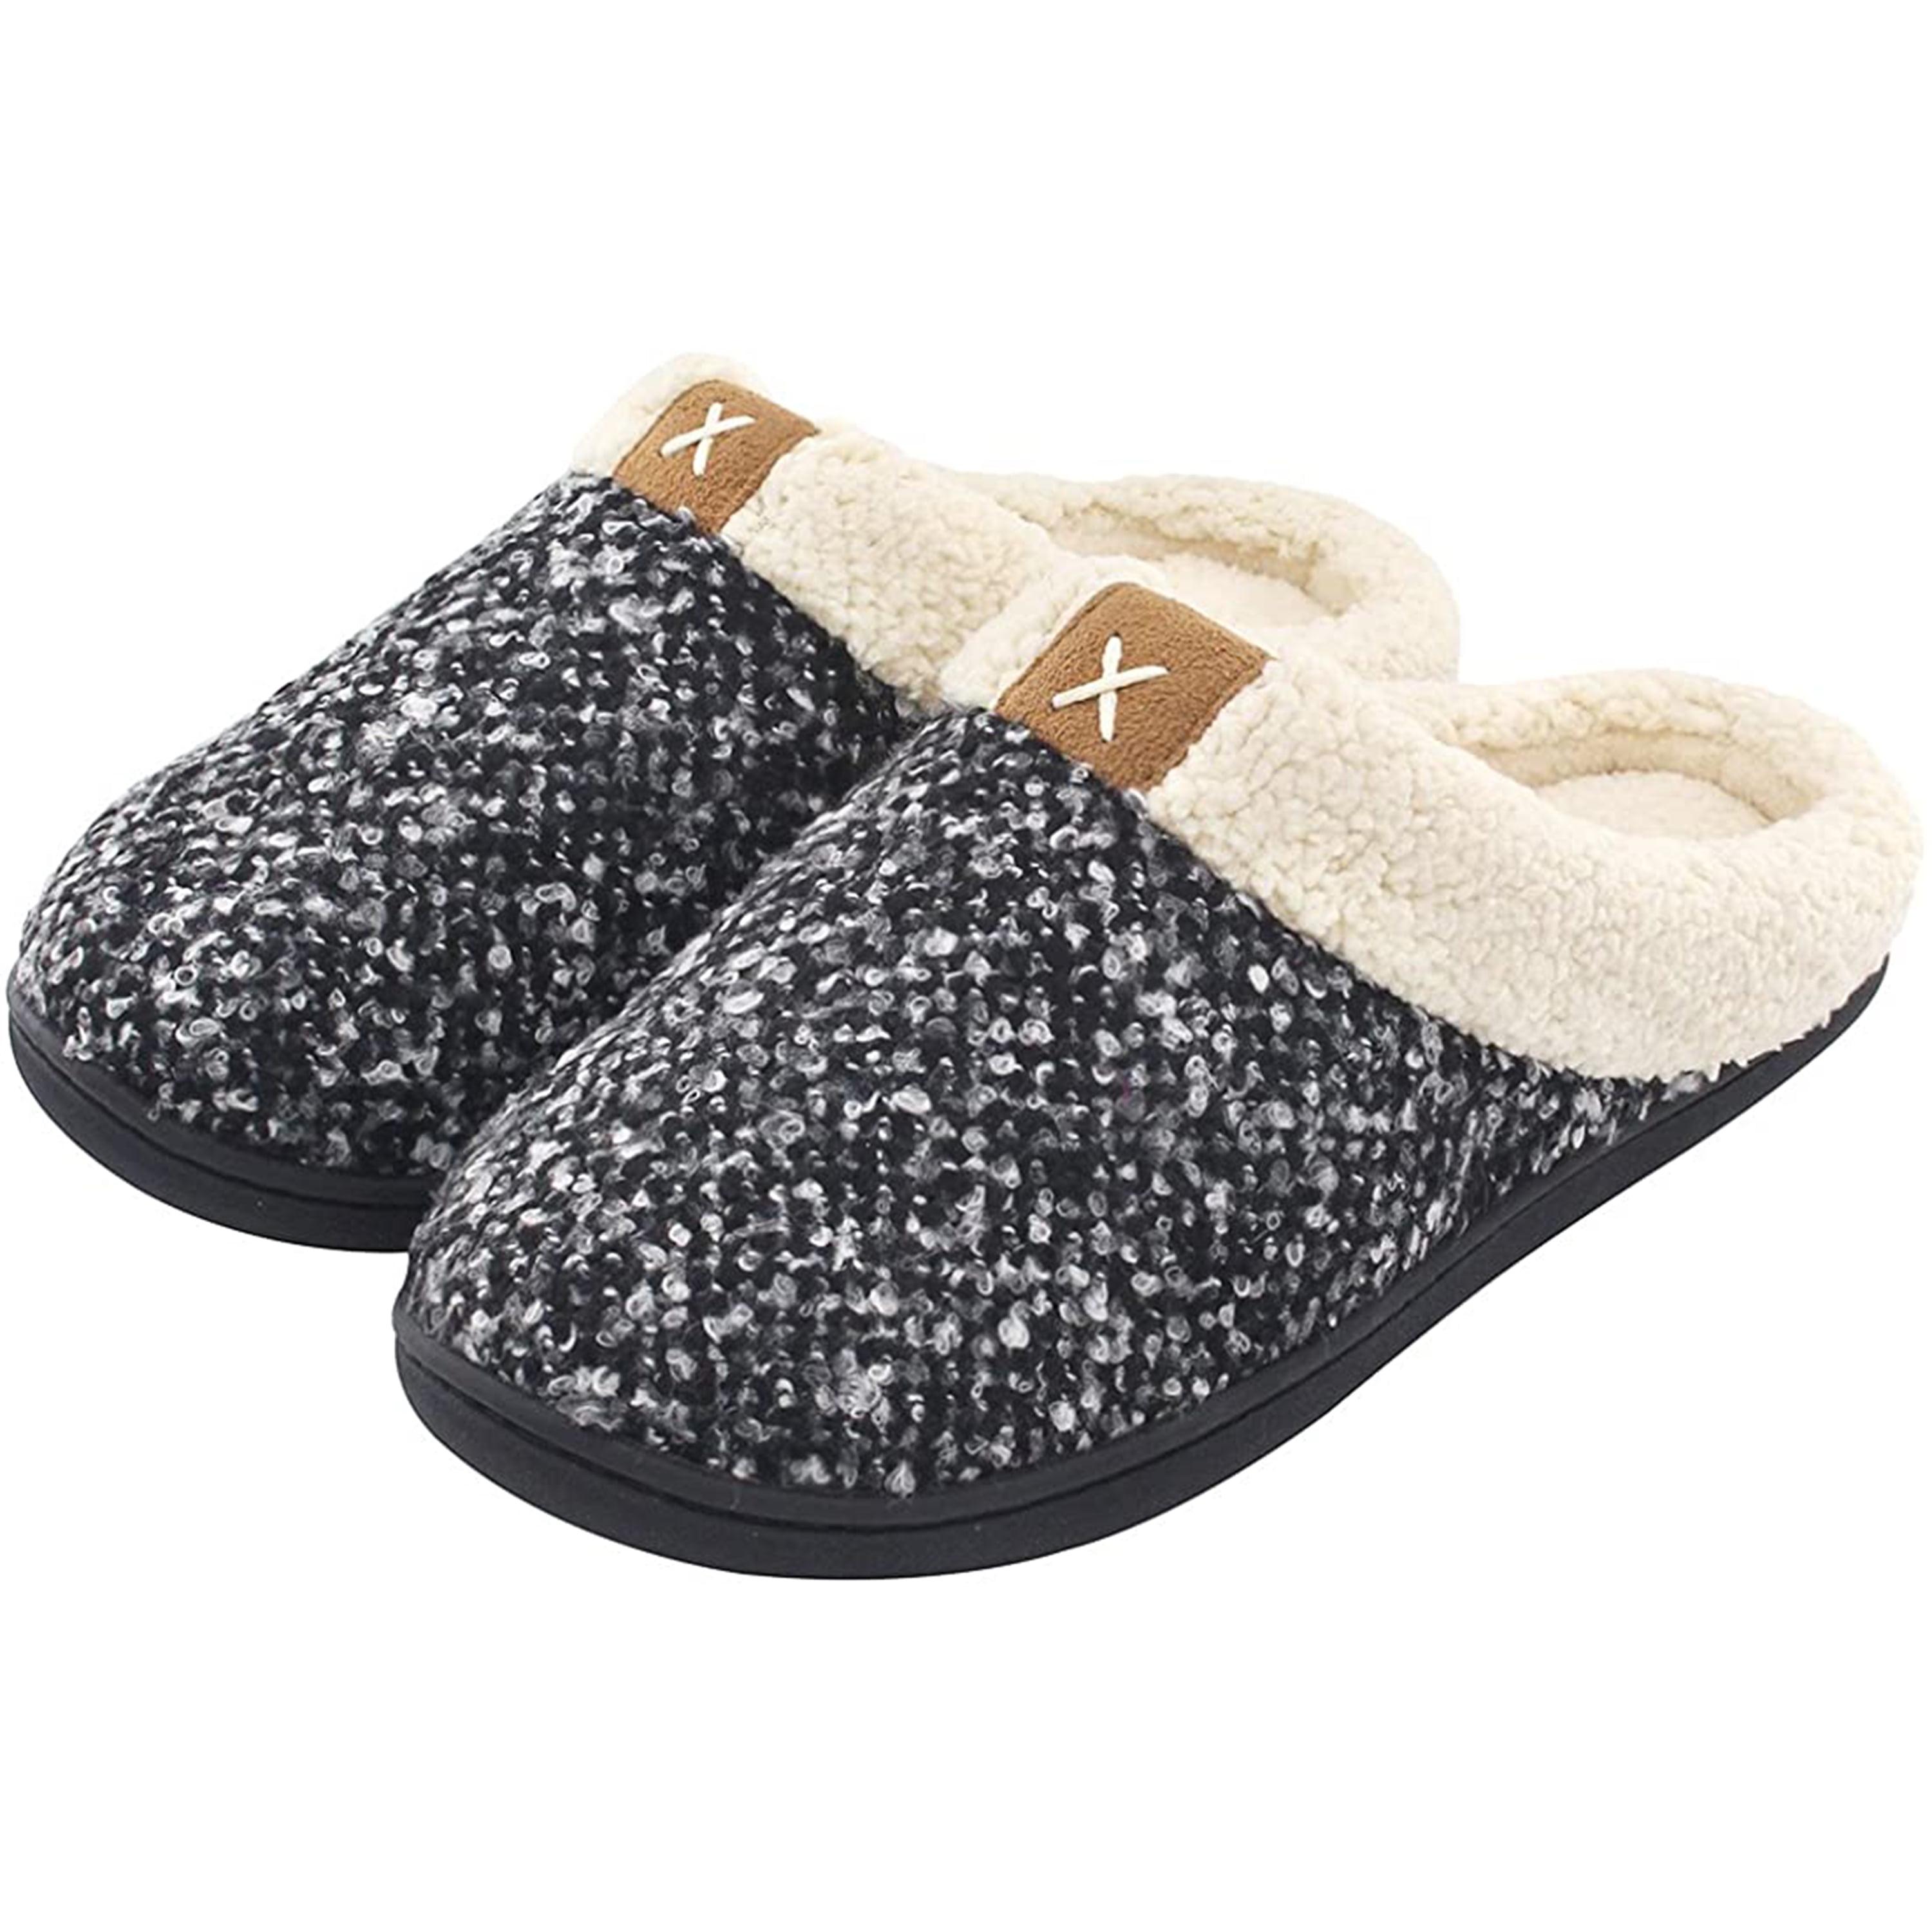 ofoot Womens Fuzzy House Slippers Indoor Outdoor Clogs Bedroom Shoes Warm Fluffy Teddy Fleece with Lace,Cozy Memory Foam Plush Lining Non Slip Rubber Sole